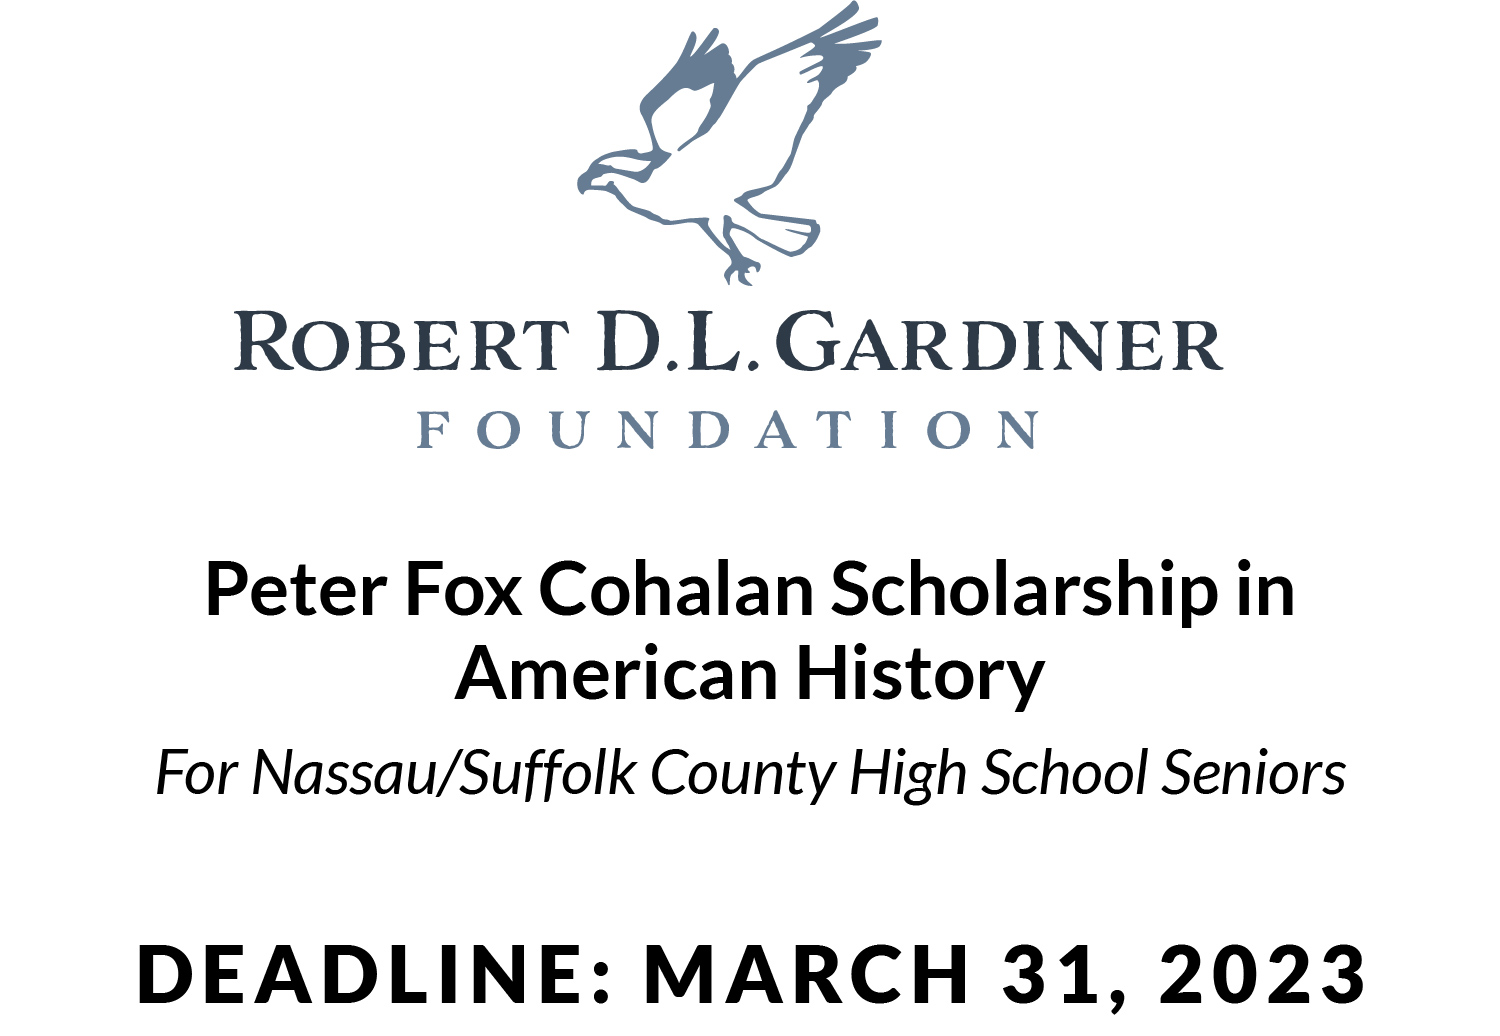 THE HONORABLE PETER FOX COHALAN SCHOLARSHIP IN AMERICAN HISTORY FOR NASSAU/SUFFOLK COUNTY HIGH SCHOOL SENIORS